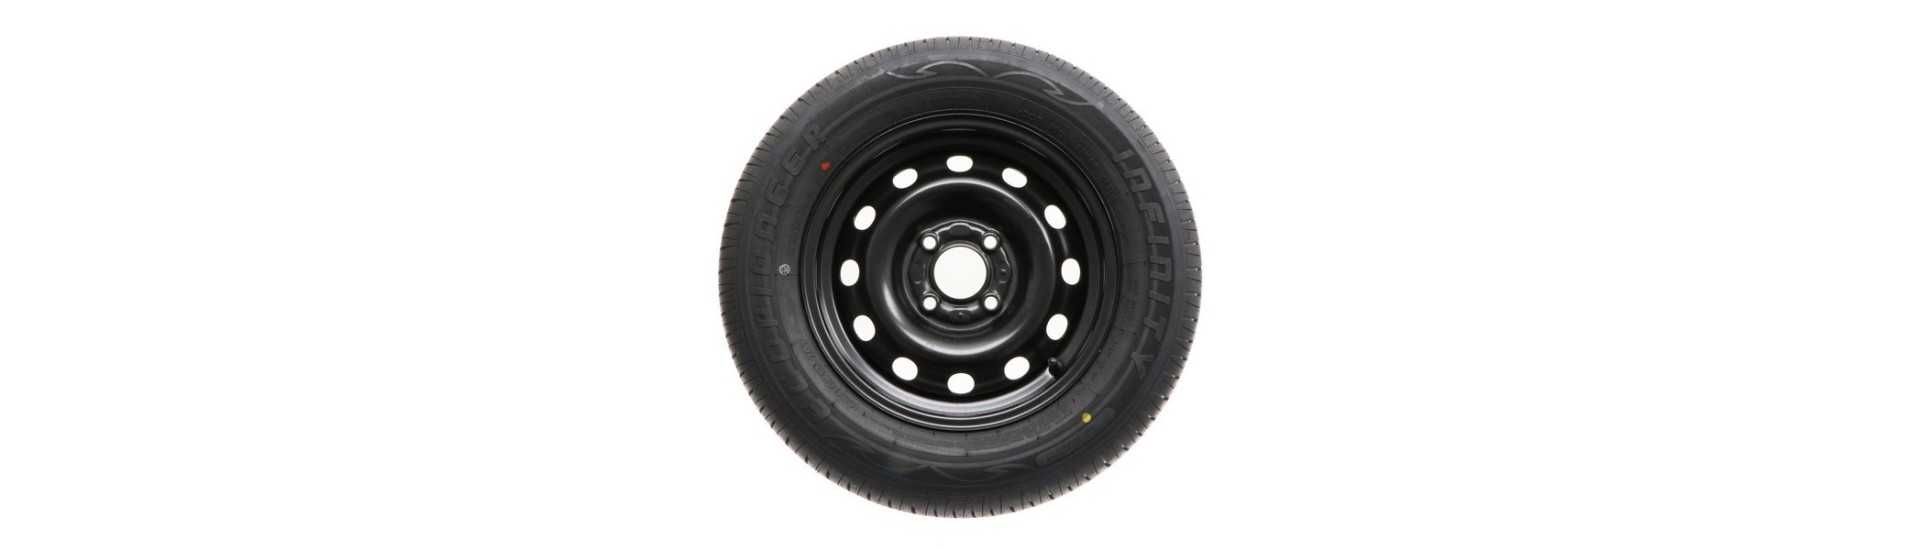 Best spare wheel for car without a license